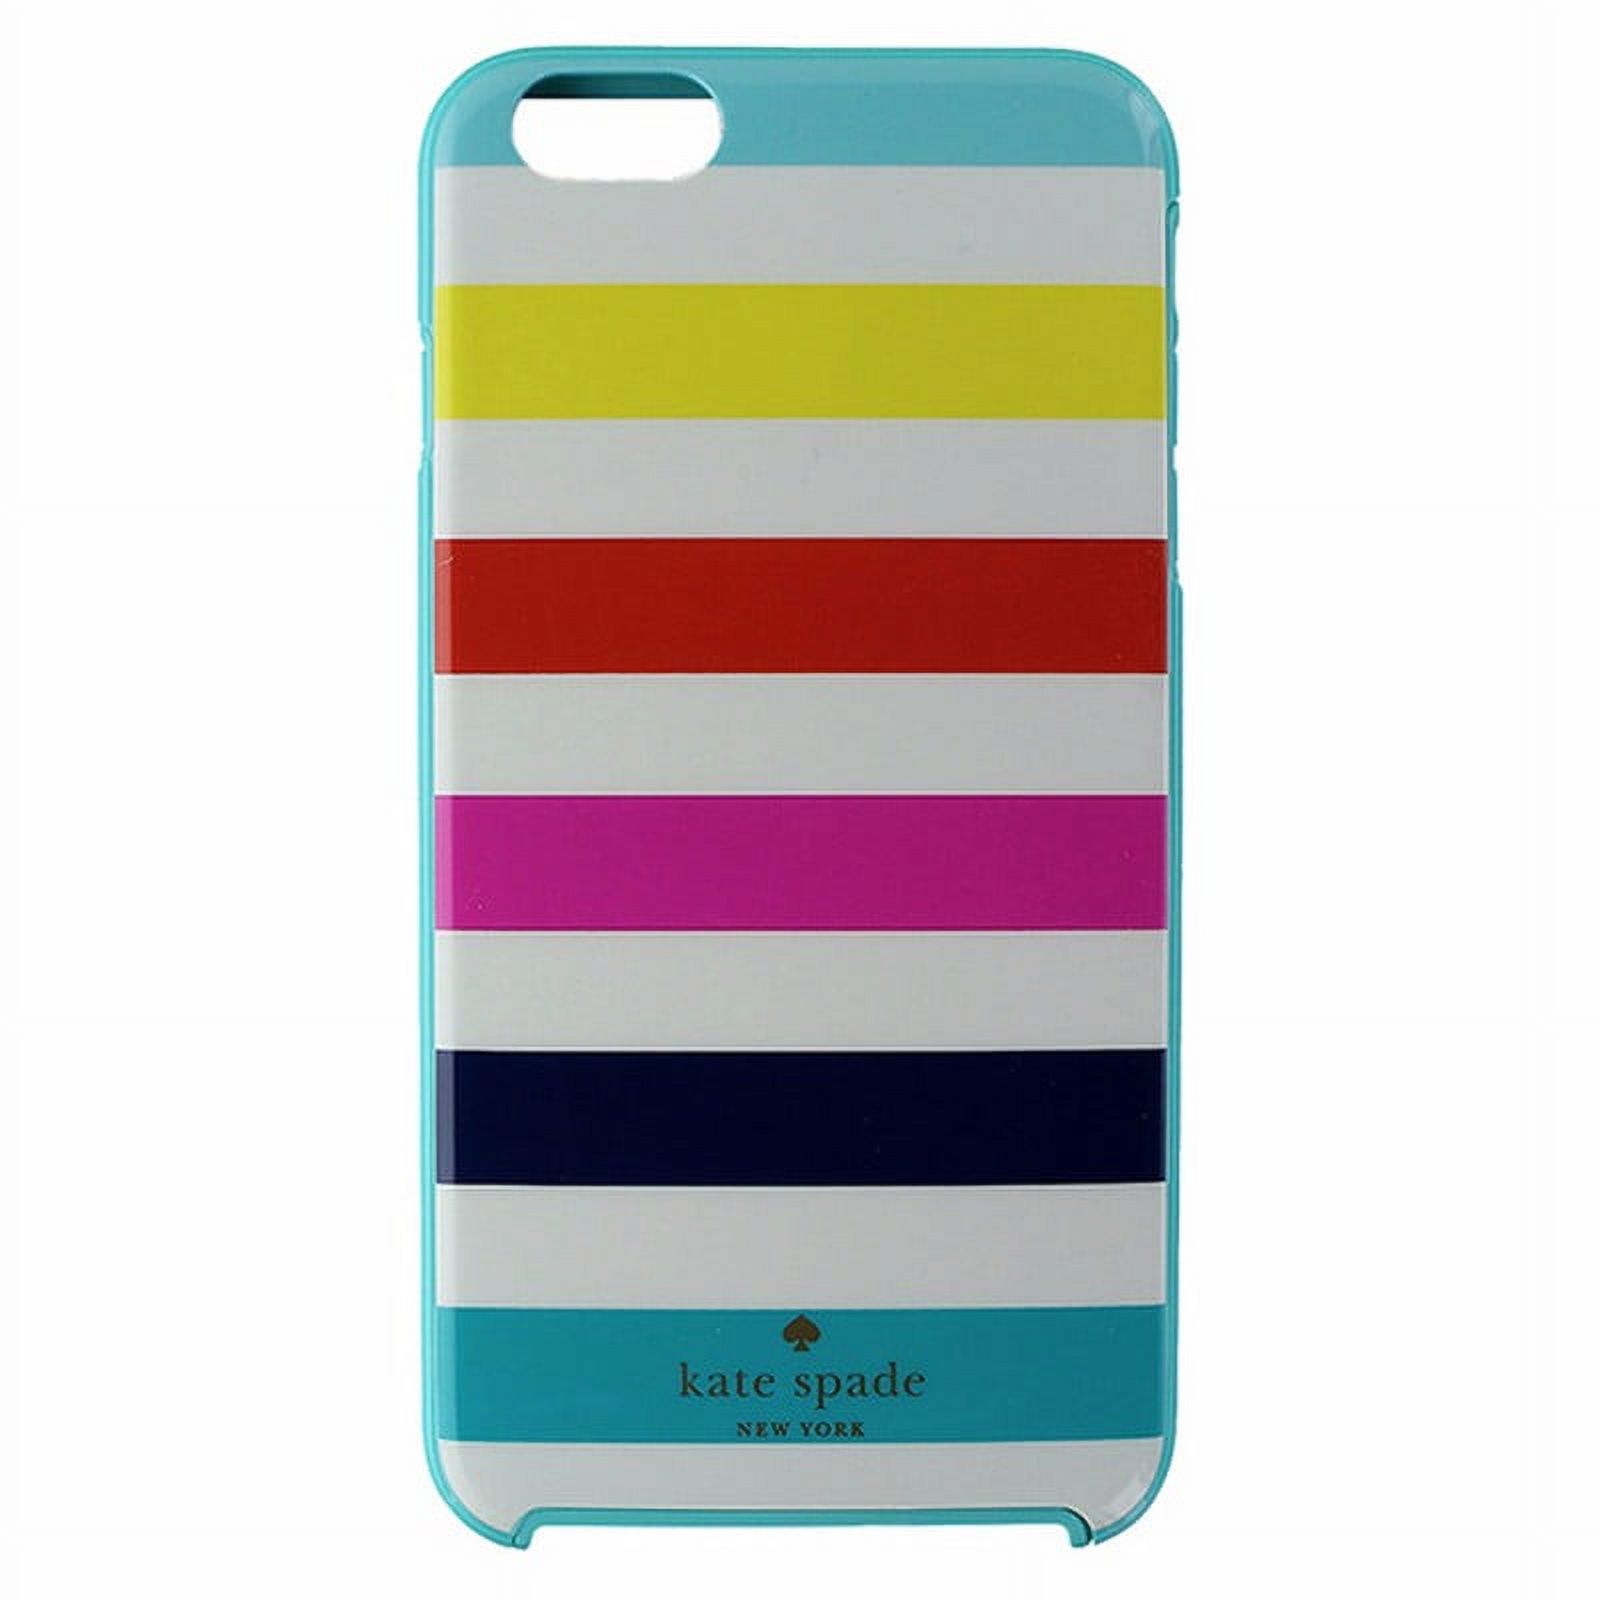 Kate Spade Hybrid Case for iPhone 6 Plus/ 6s Plus - Candy Stripes / Light Blue - image 1 of 3